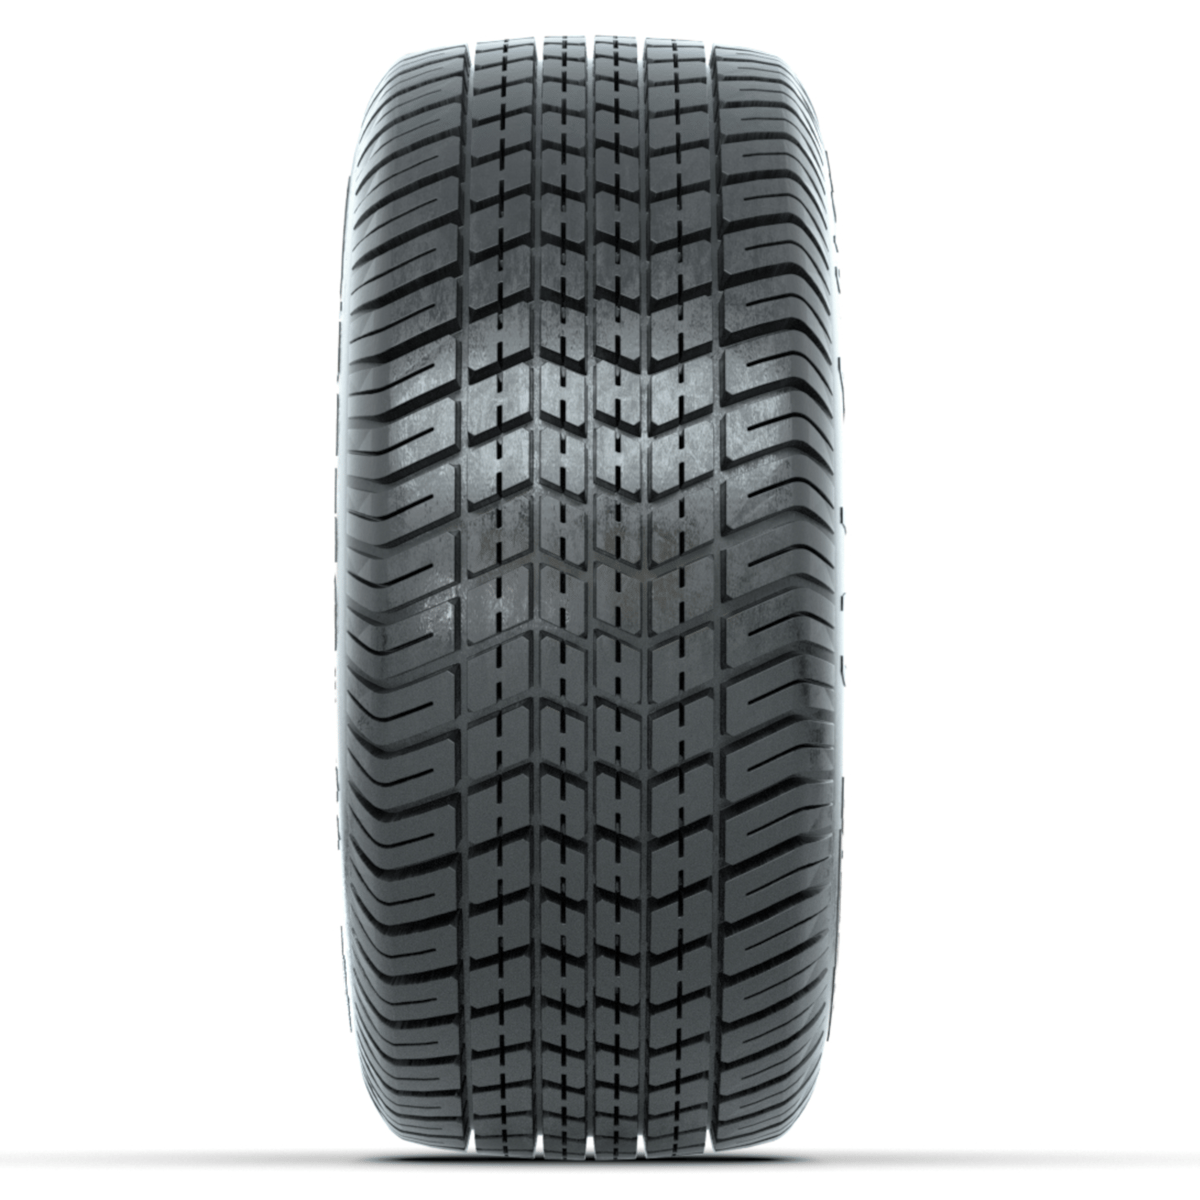 255/50-12 Excel Classic Street Tire (Lift Required)